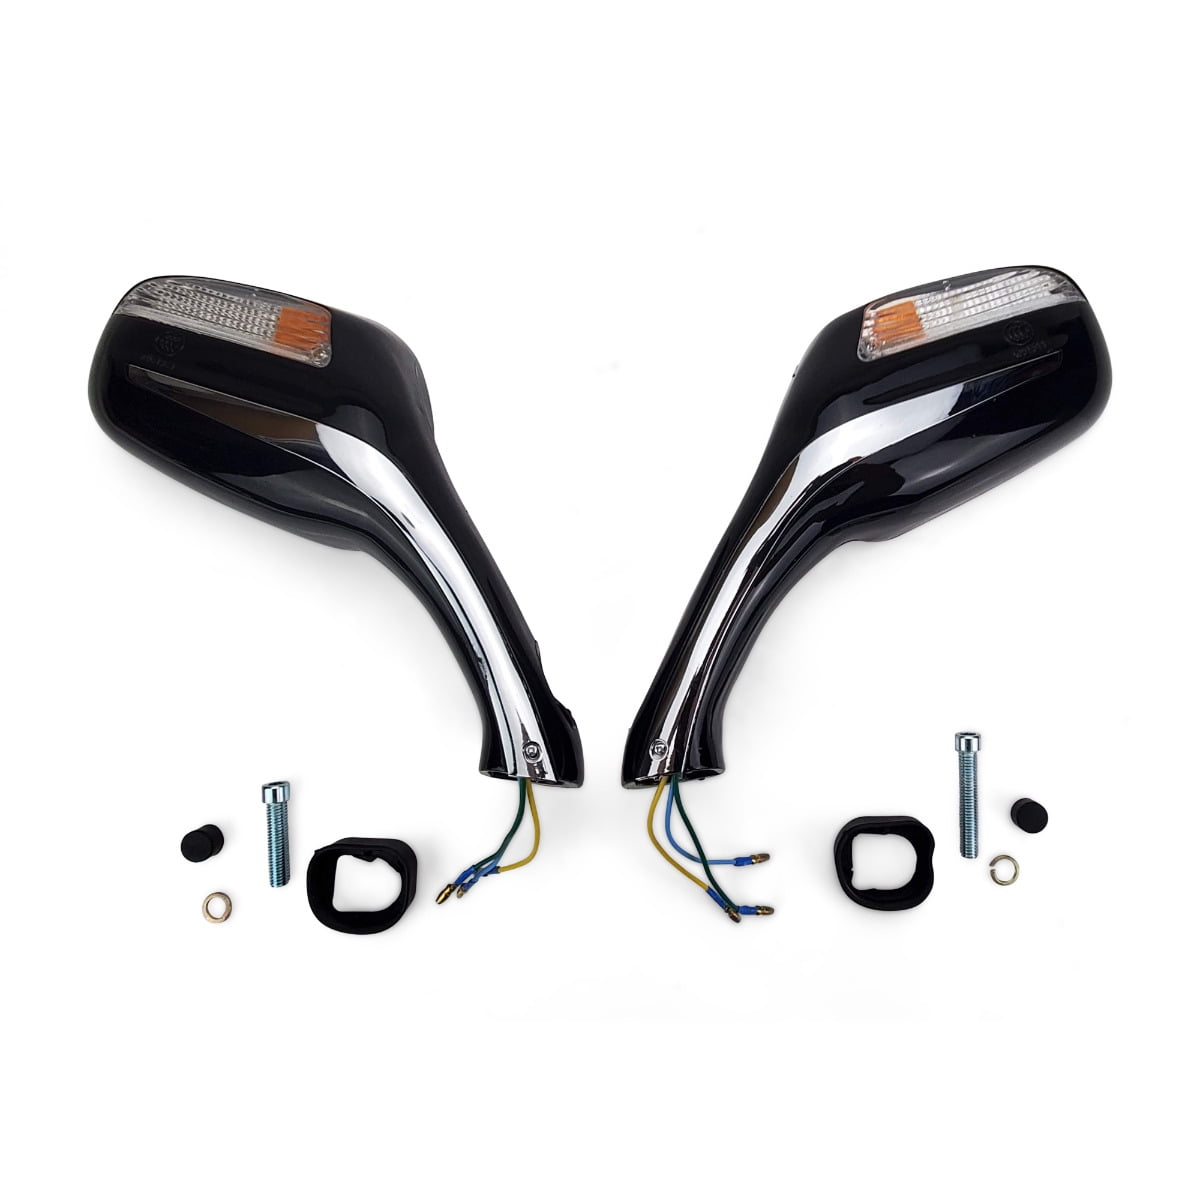 8mm thread Black Mirrors w/built in blinkers set for Moped Scooters 